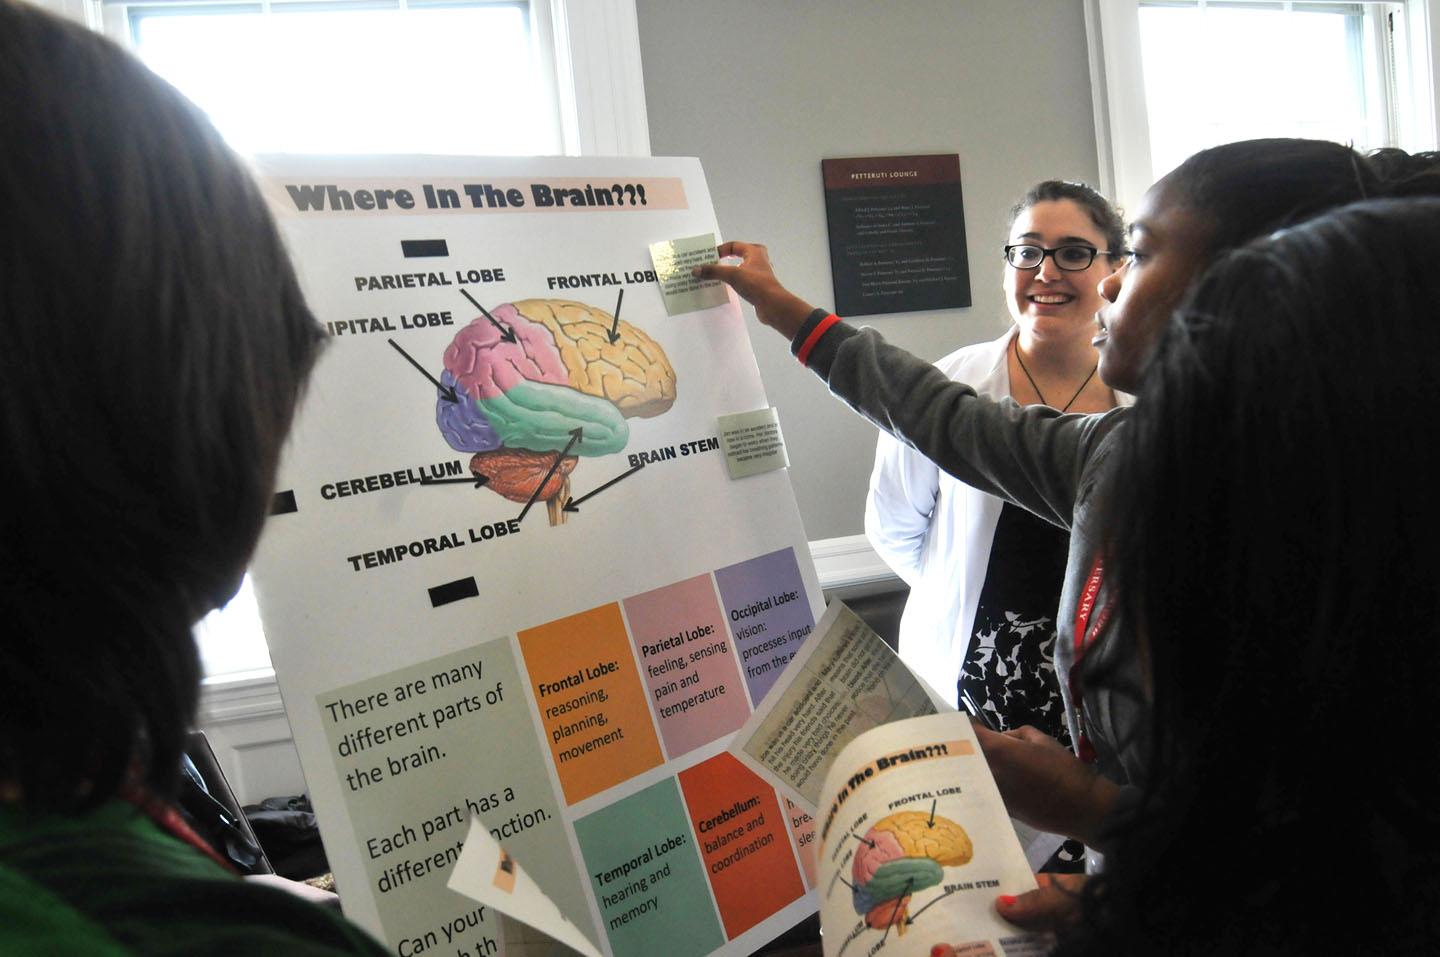 Pin the sticker on the brain: Medical student Zoe Weiss leads a session on the geography of the brain, asking middle school students to match a problem with the region of the brain that's involved. Credit:&nbsp;Frank&nbsp;Mullin/Brown&nbsp;University